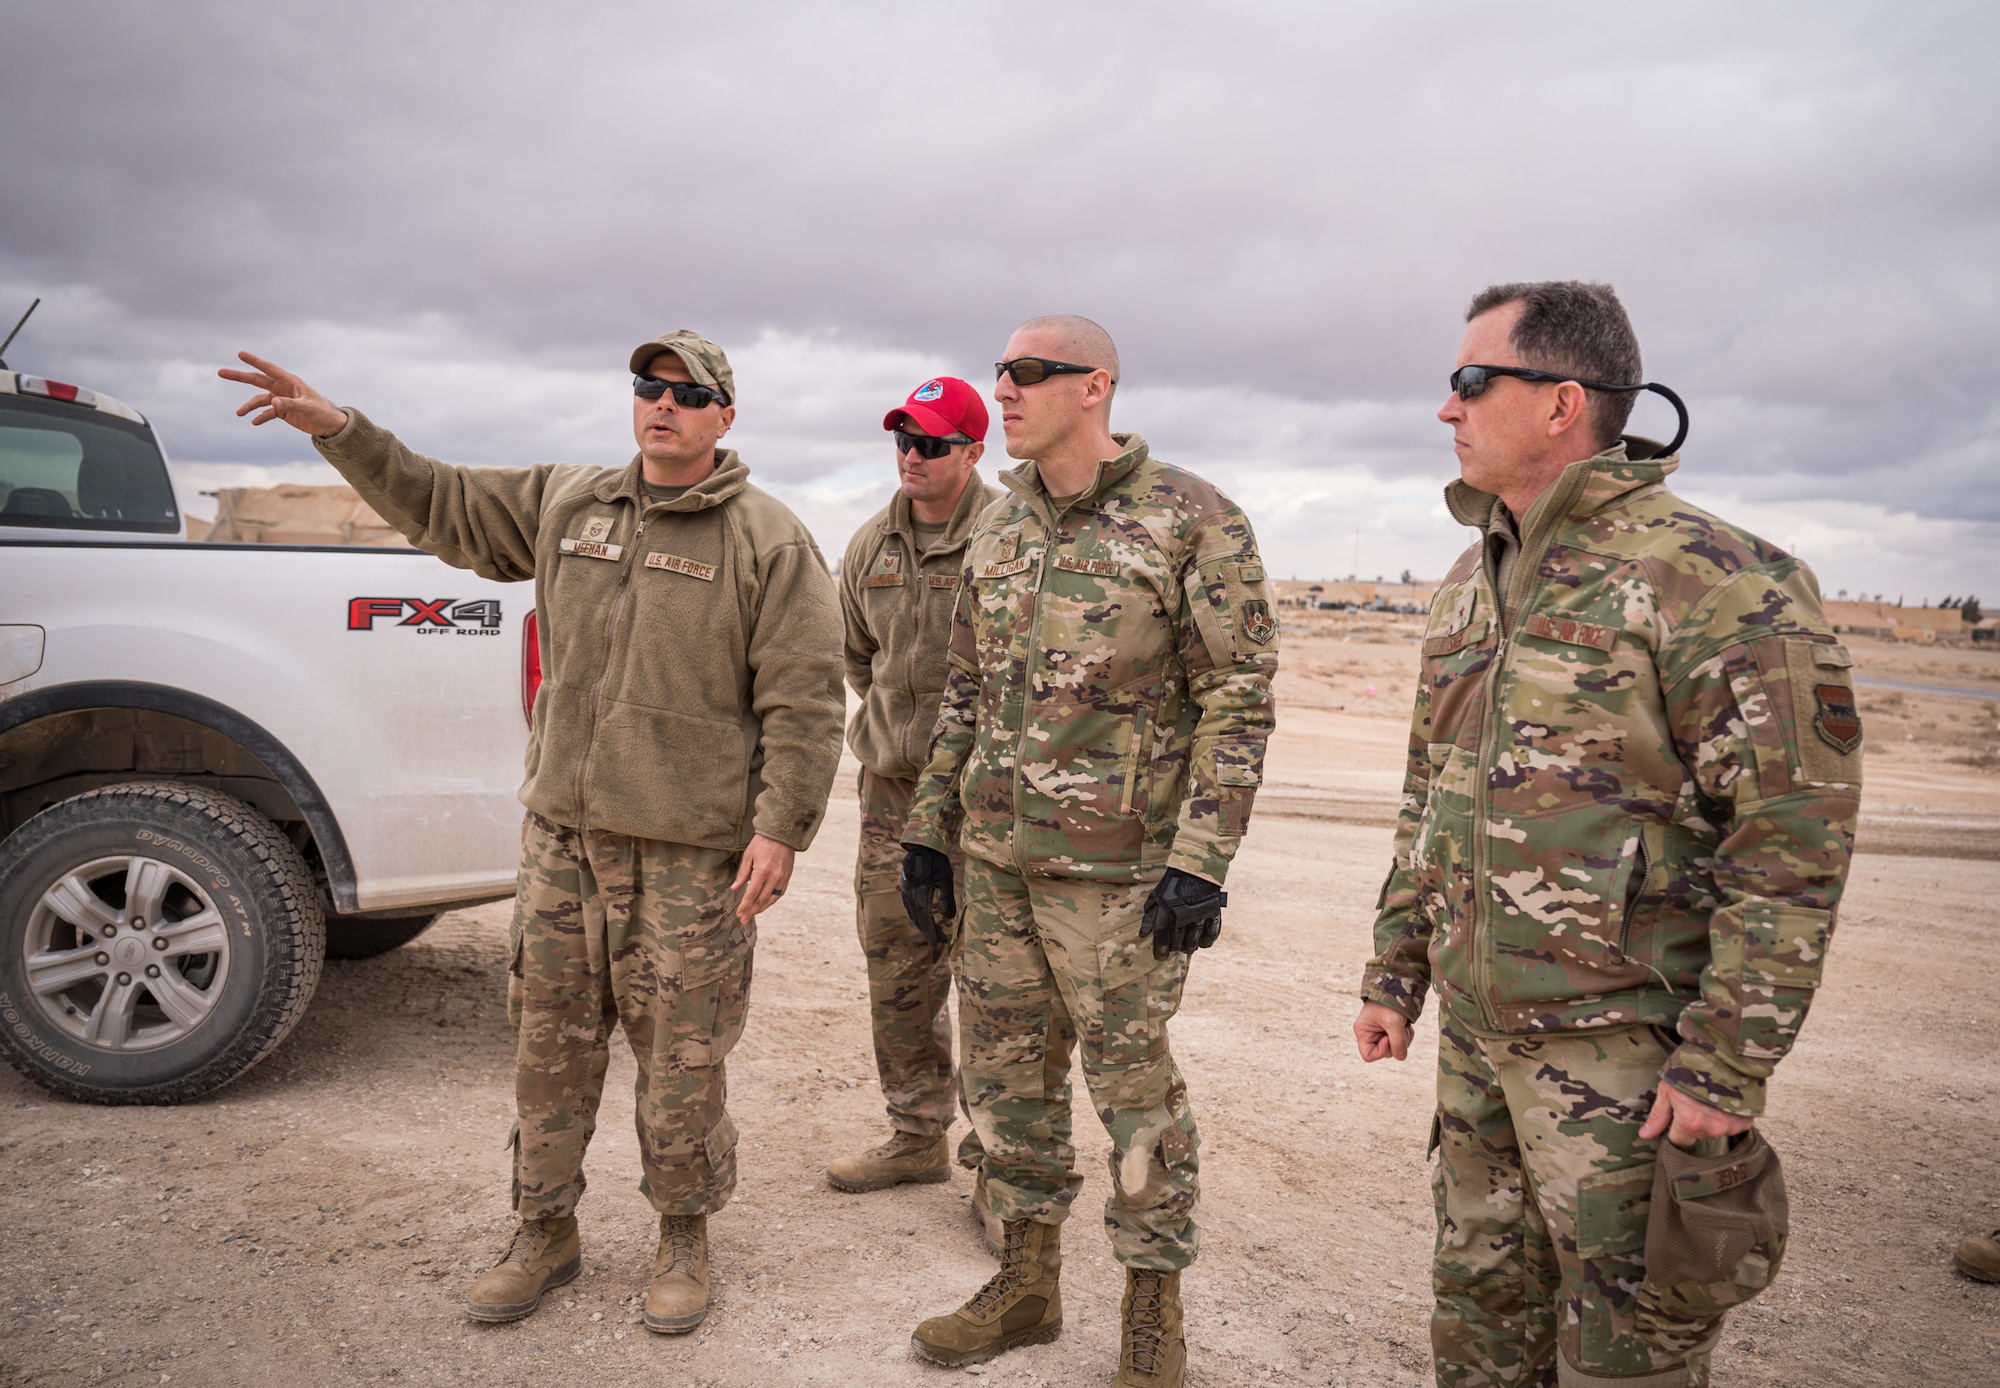 U.S. Air Force Master Sgt. Joseph Meehan, 577th Expeditionary Prime Beef Squadron and Tech. Sgt. James Gasbarro, 557th Expeditionary Red Horse Squadron, overrun project managers, give Brig. Gen. Christopher Sage, 332d Air Expeditionary Wing commander, and Chief Master Sgt. Sean Milligan, 332d AEW command chief, an overview of working being done to expand the current runway at an undisclosed location in Southwest Asia March 12, 2022. (U.S. Air Force photo by Master Sgt. Christopher Parr)